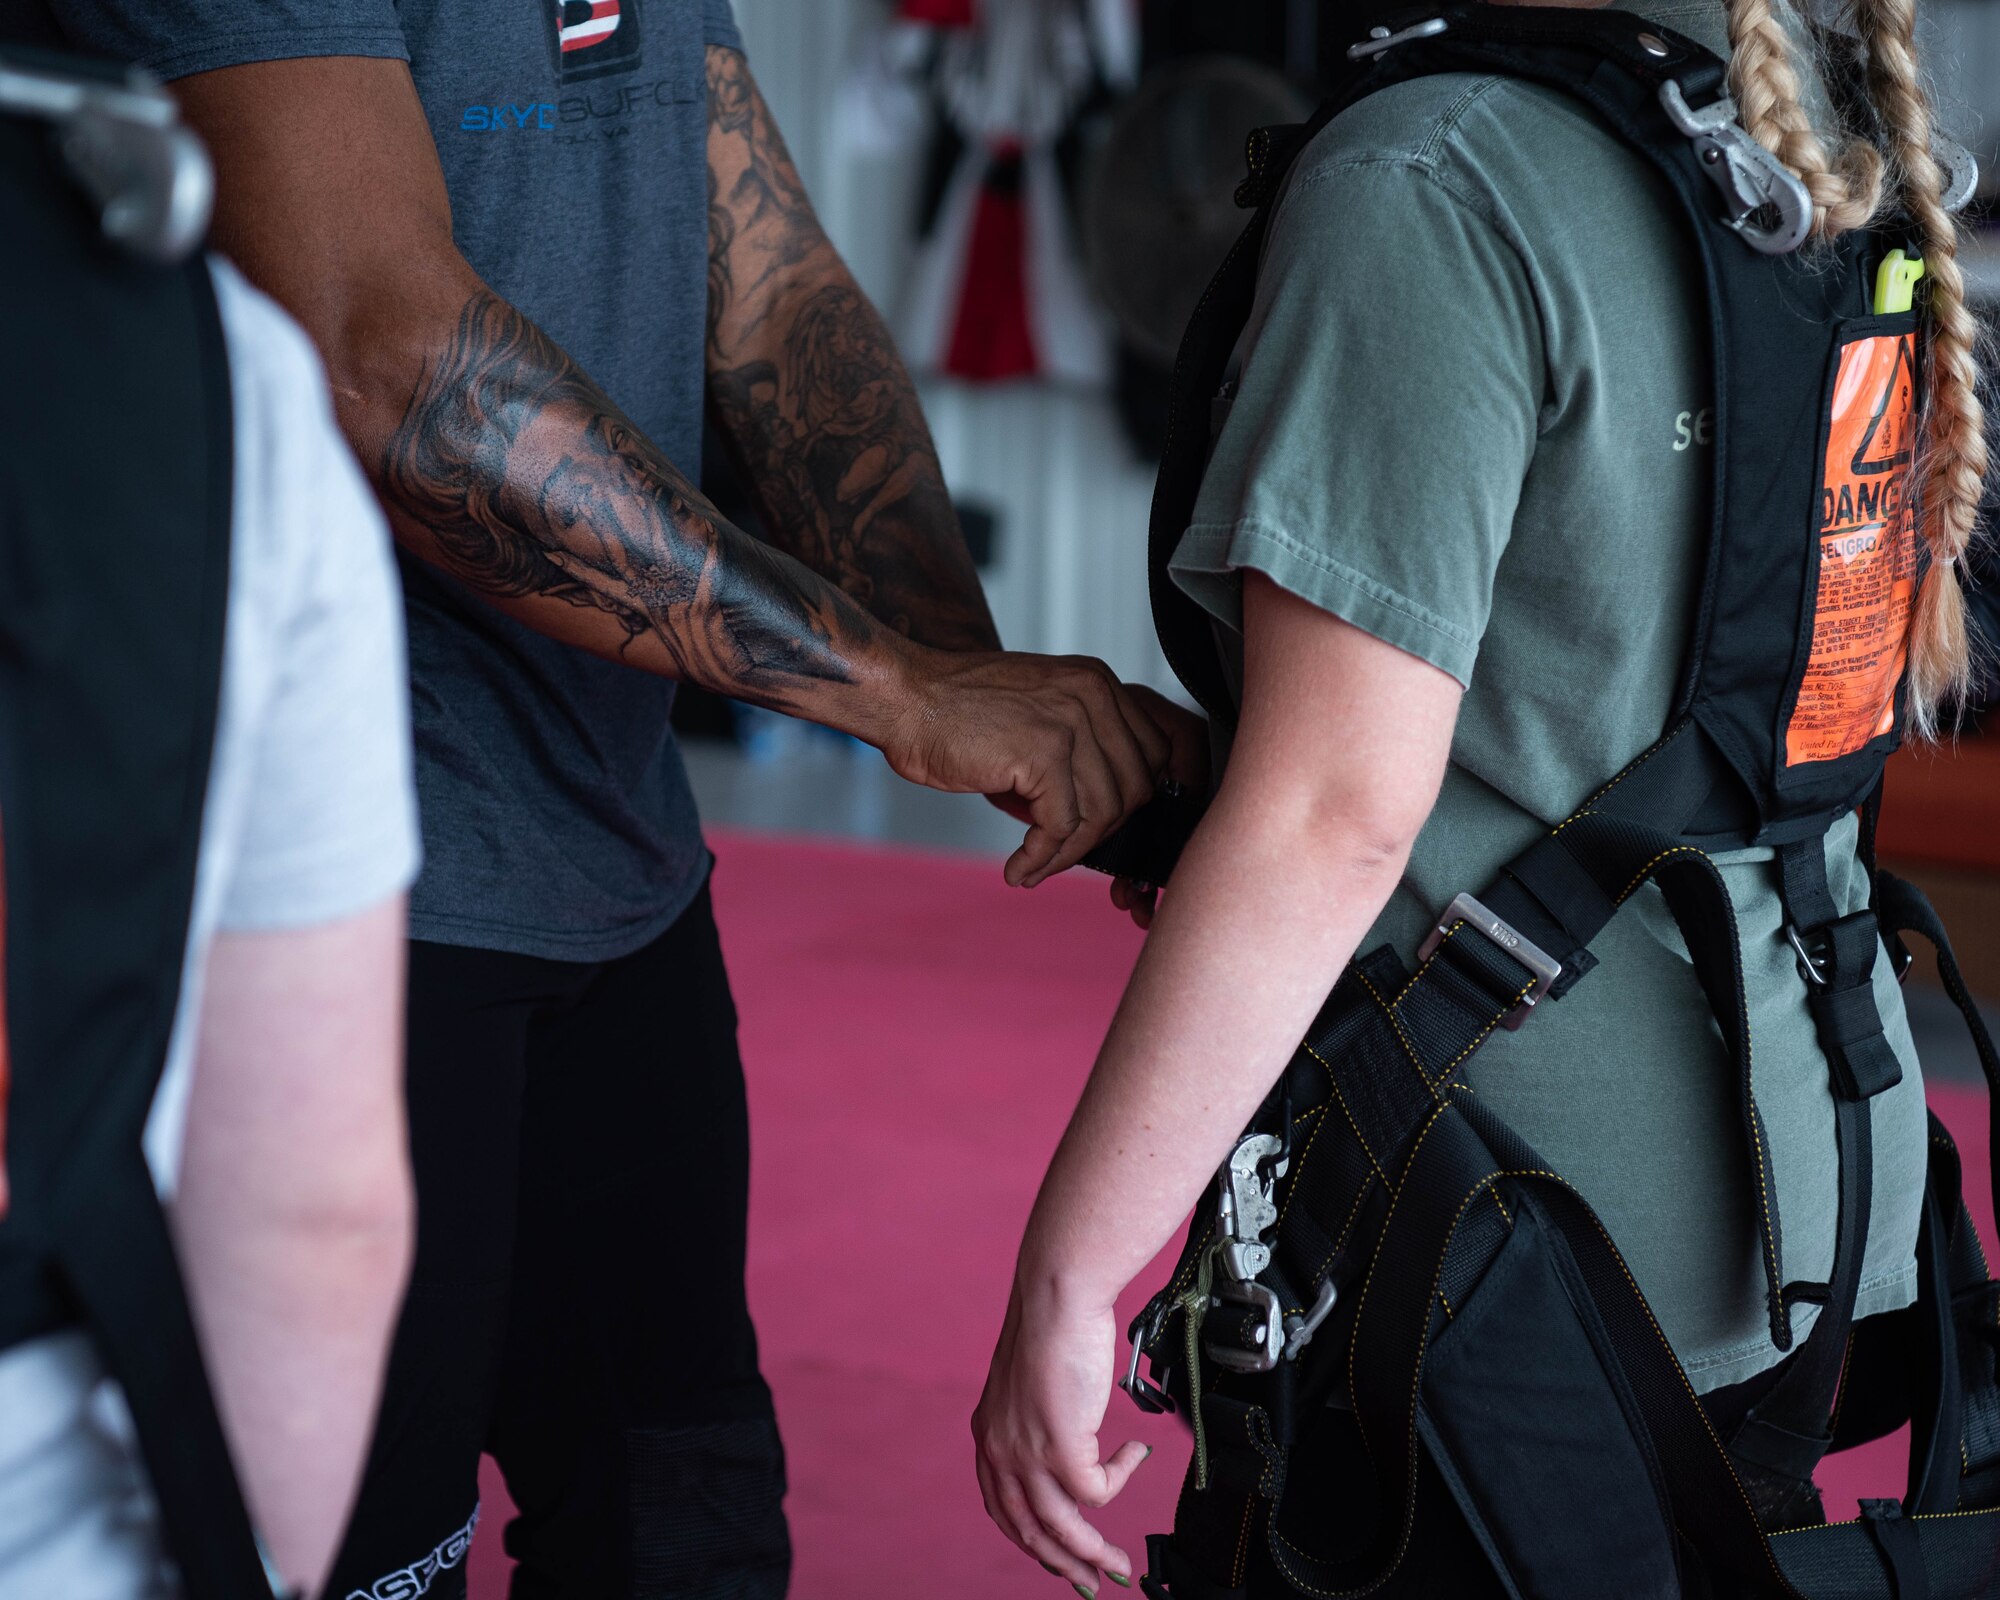 An Airman is fitted for a harness before going skydiving.